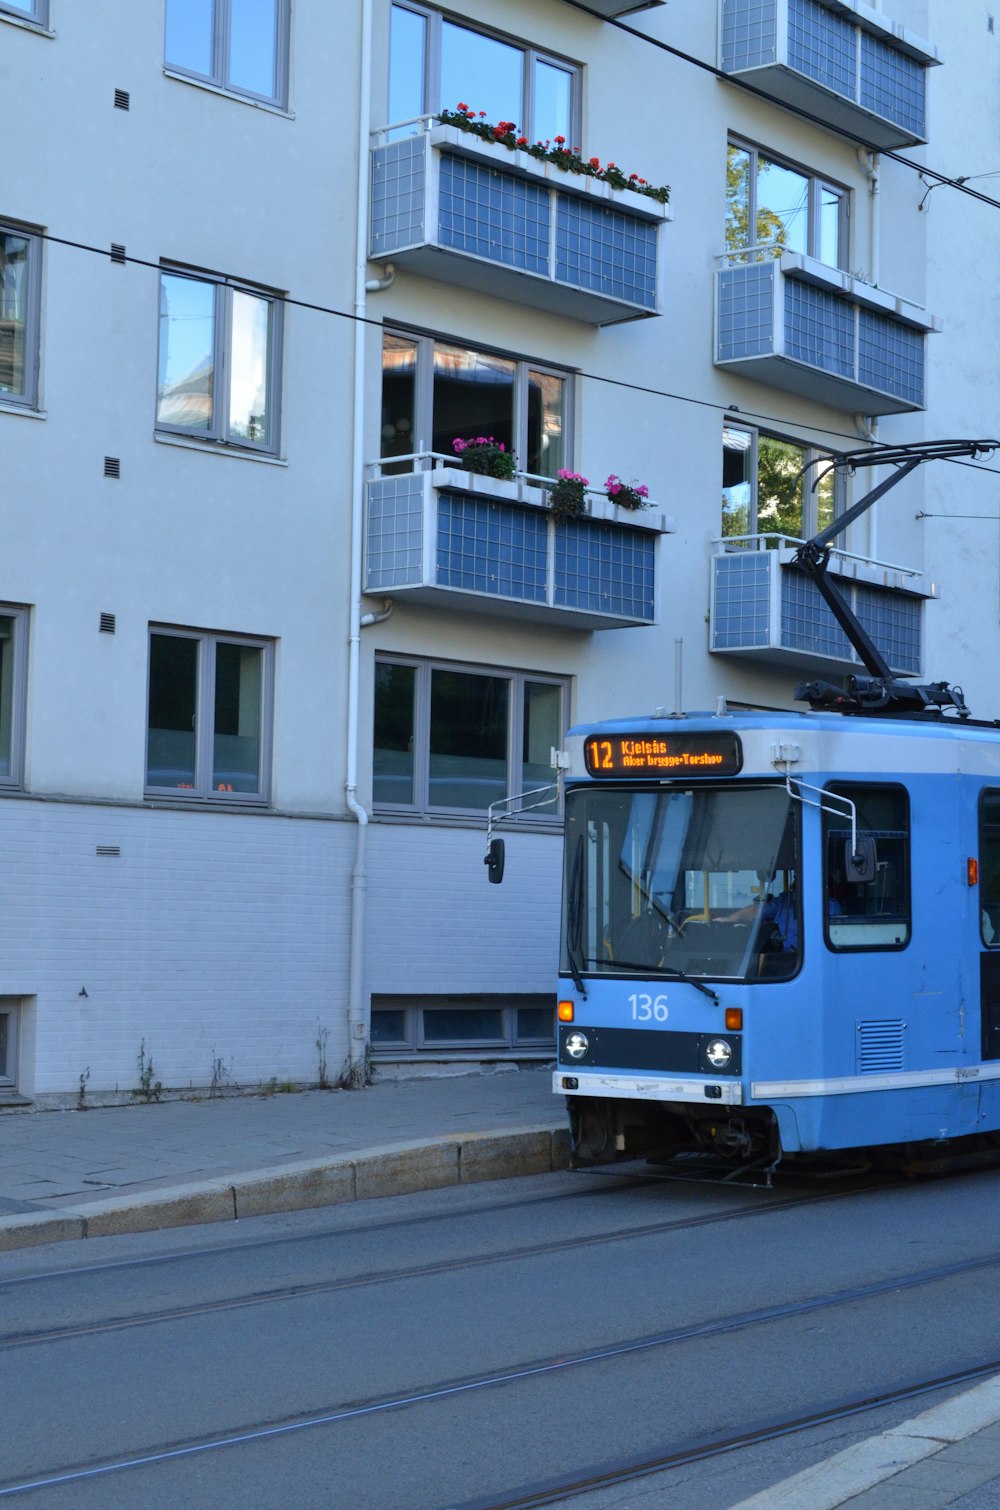 a blue and white trolley on a city street